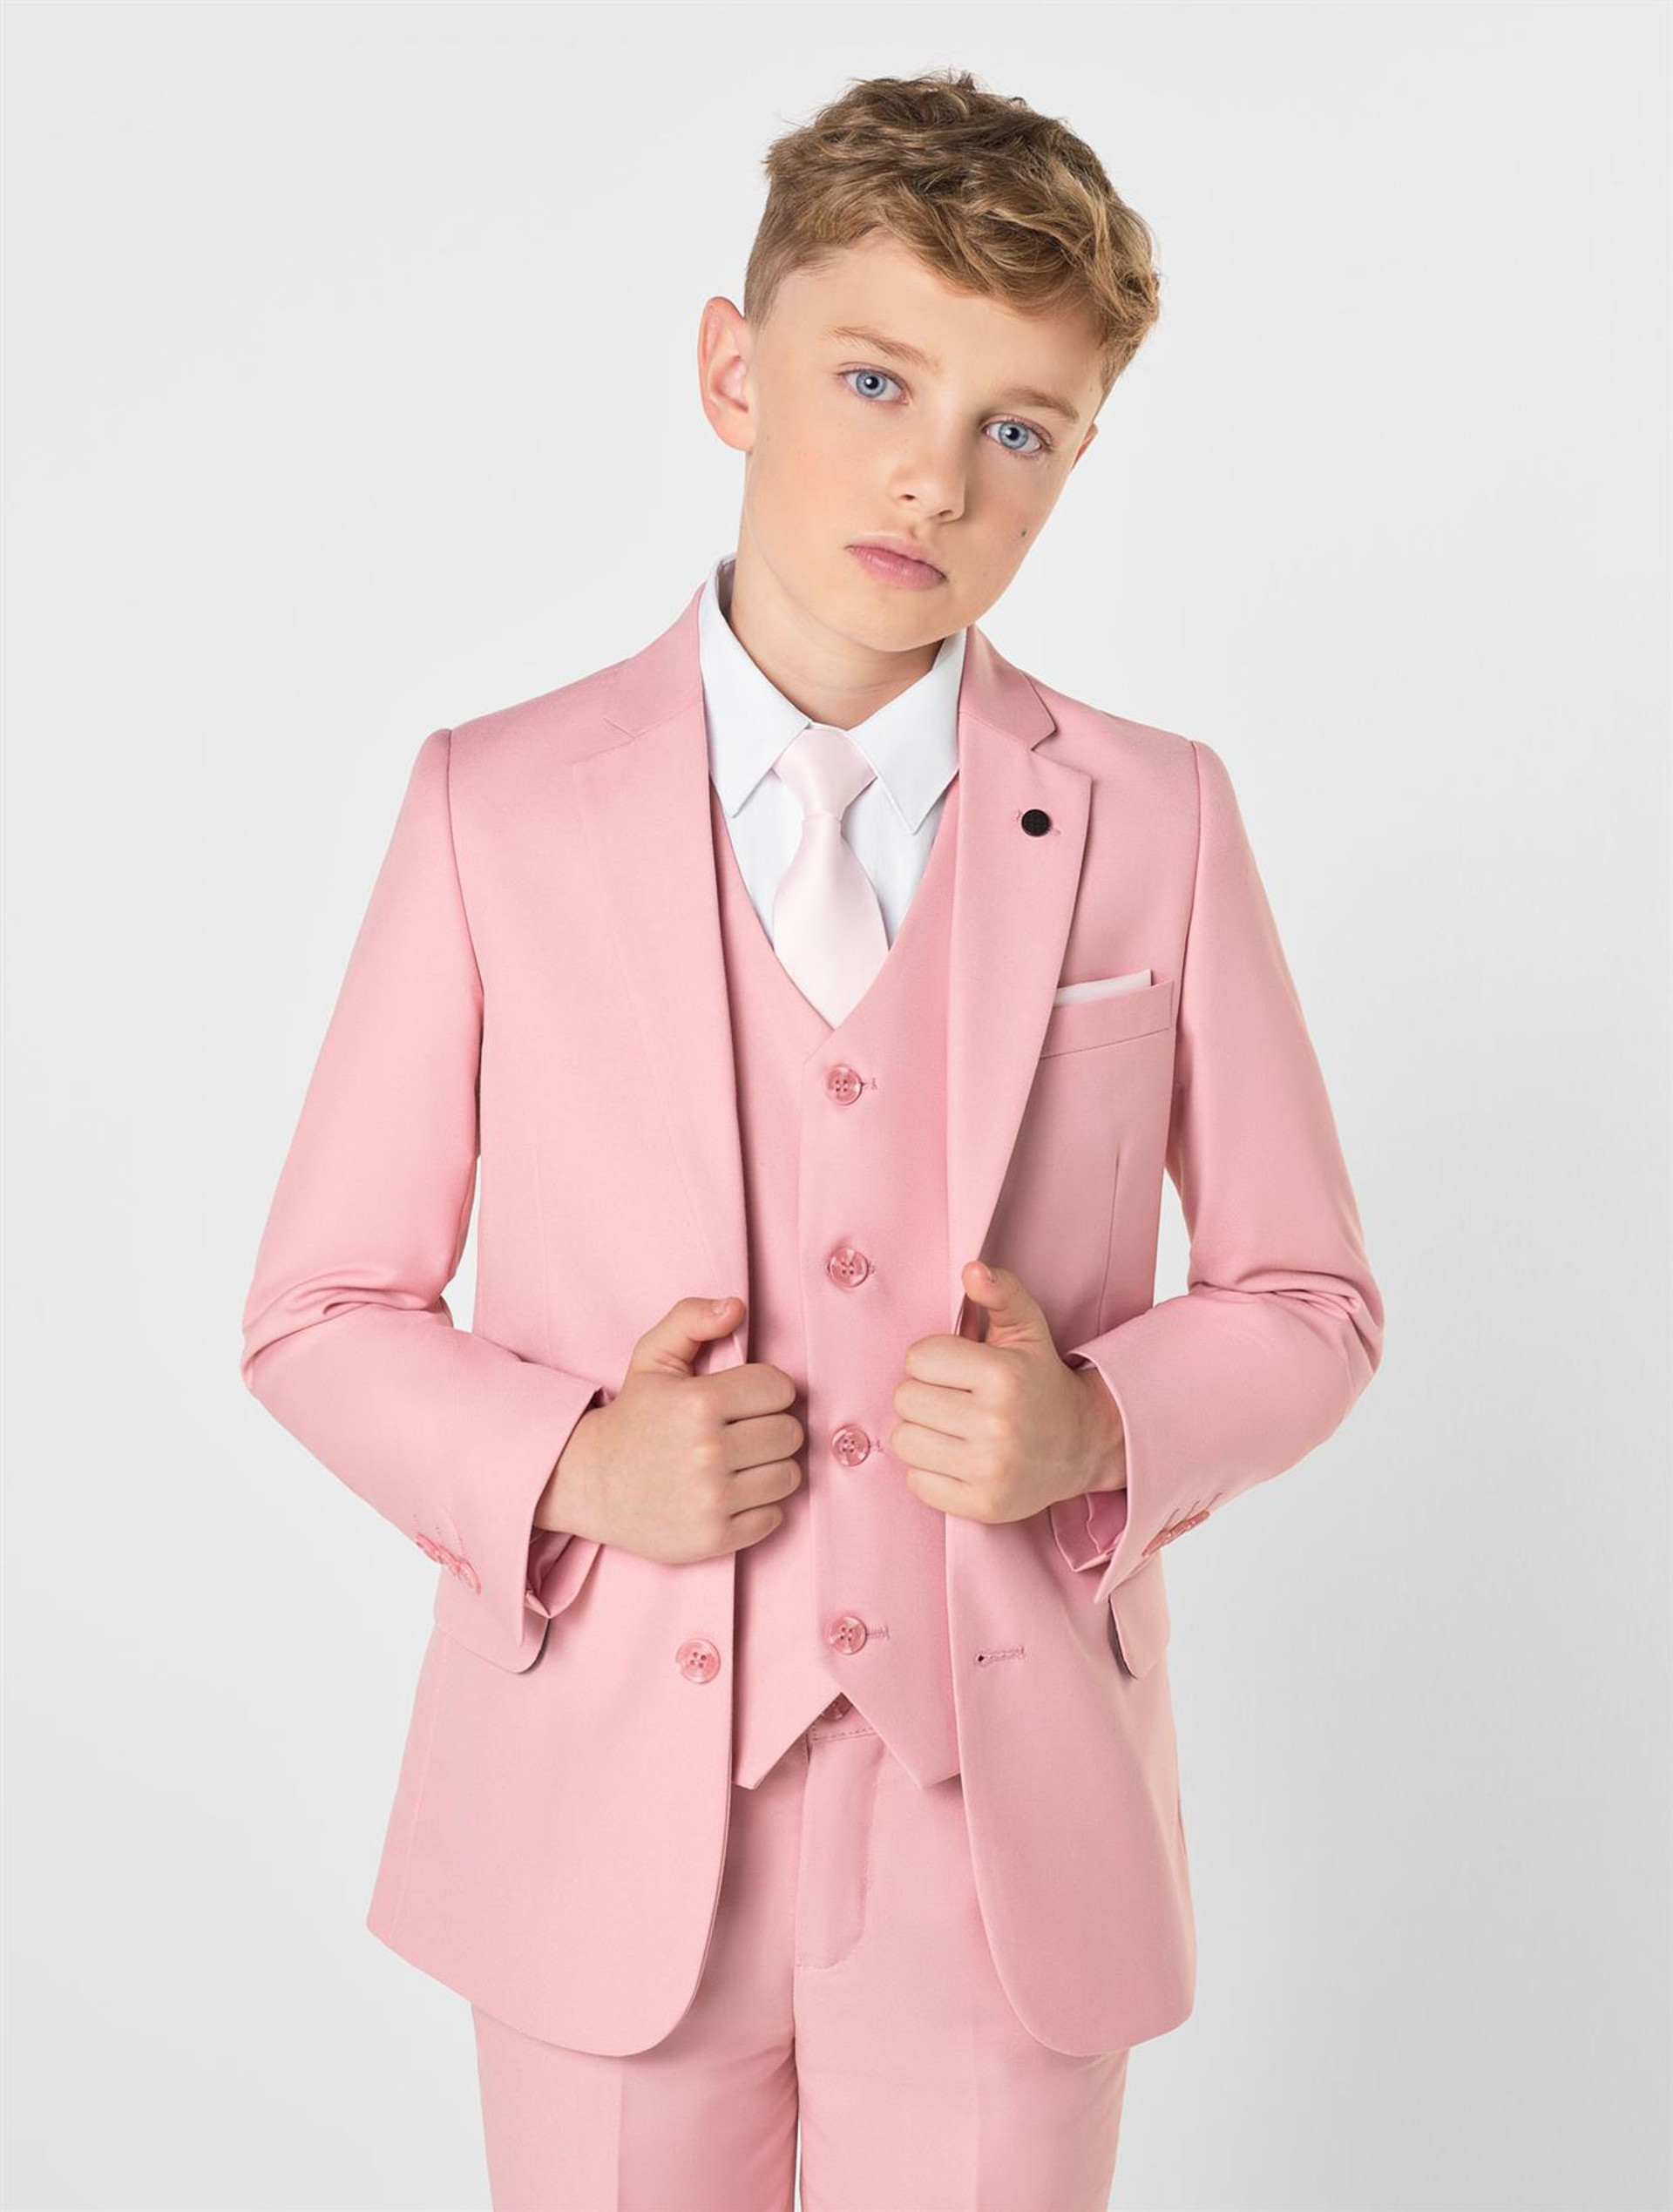 Boys Suits Kids Page Boy Suits And Wedding Suits